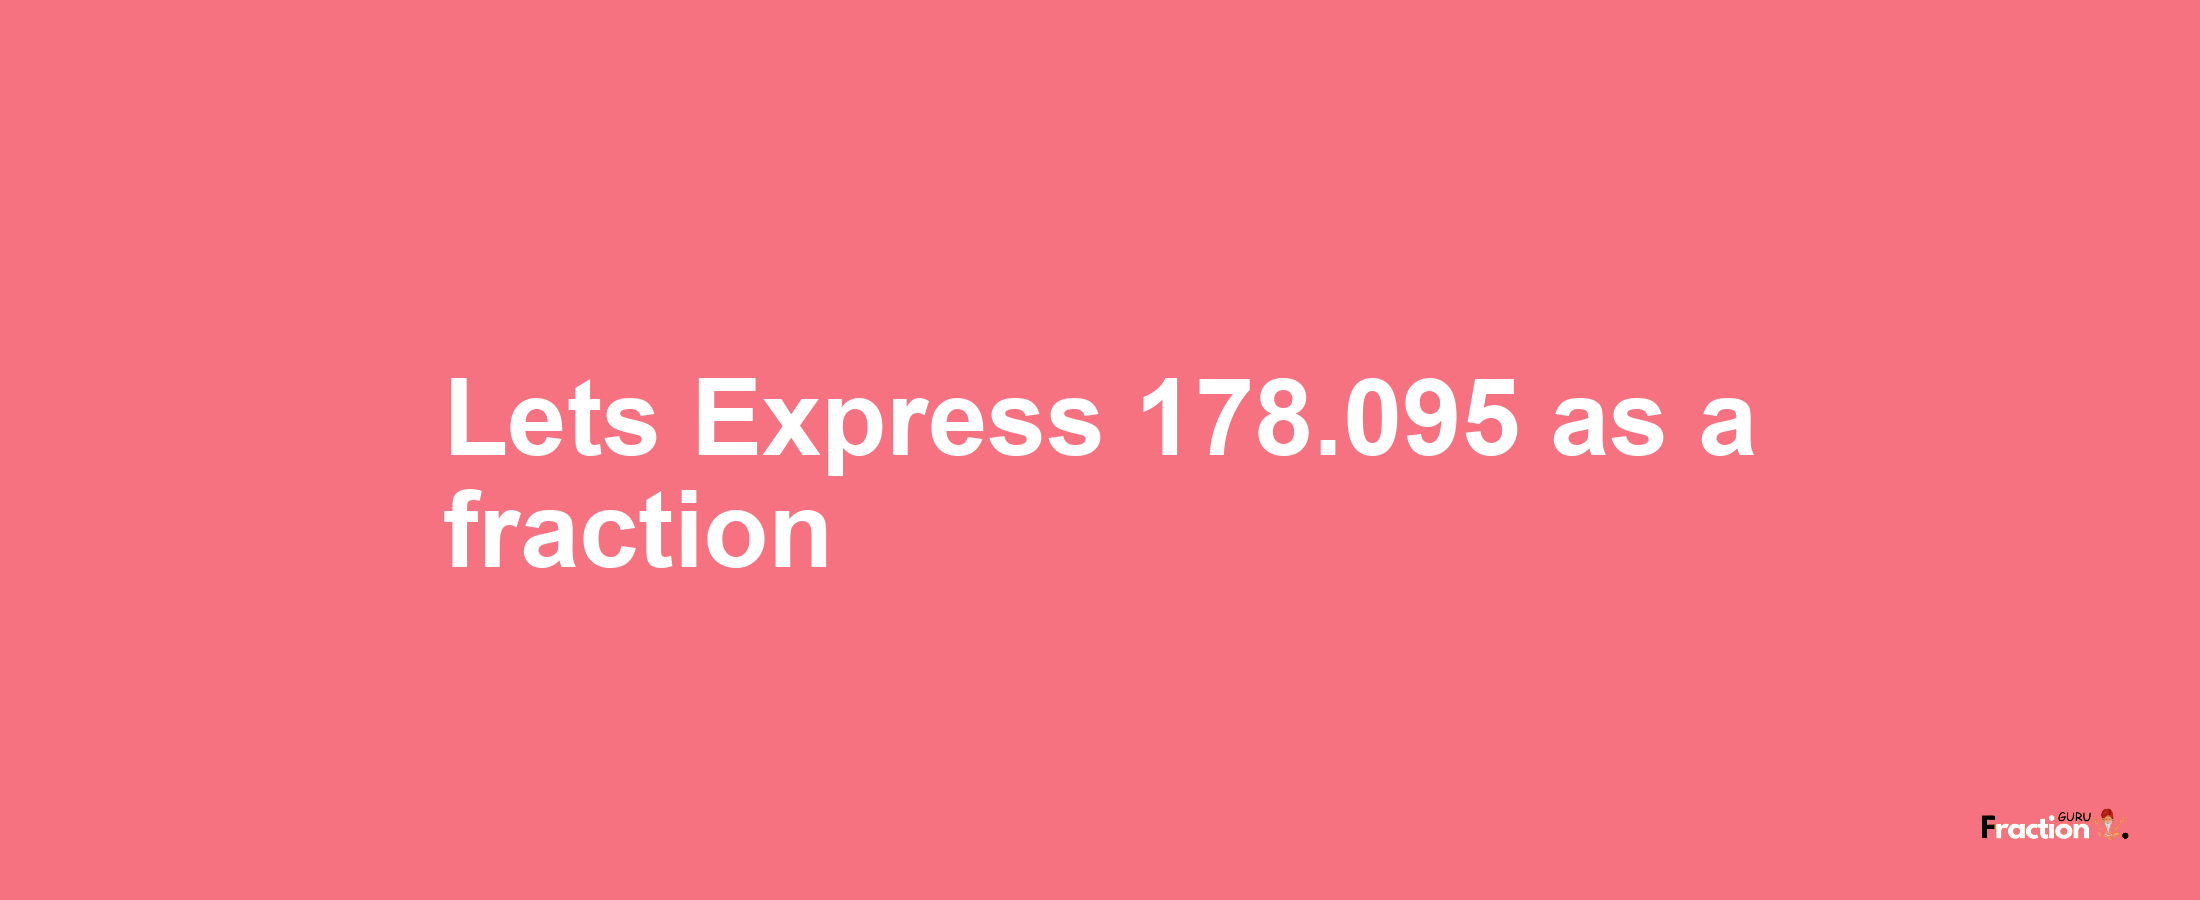 Lets Express 178.095 as afraction